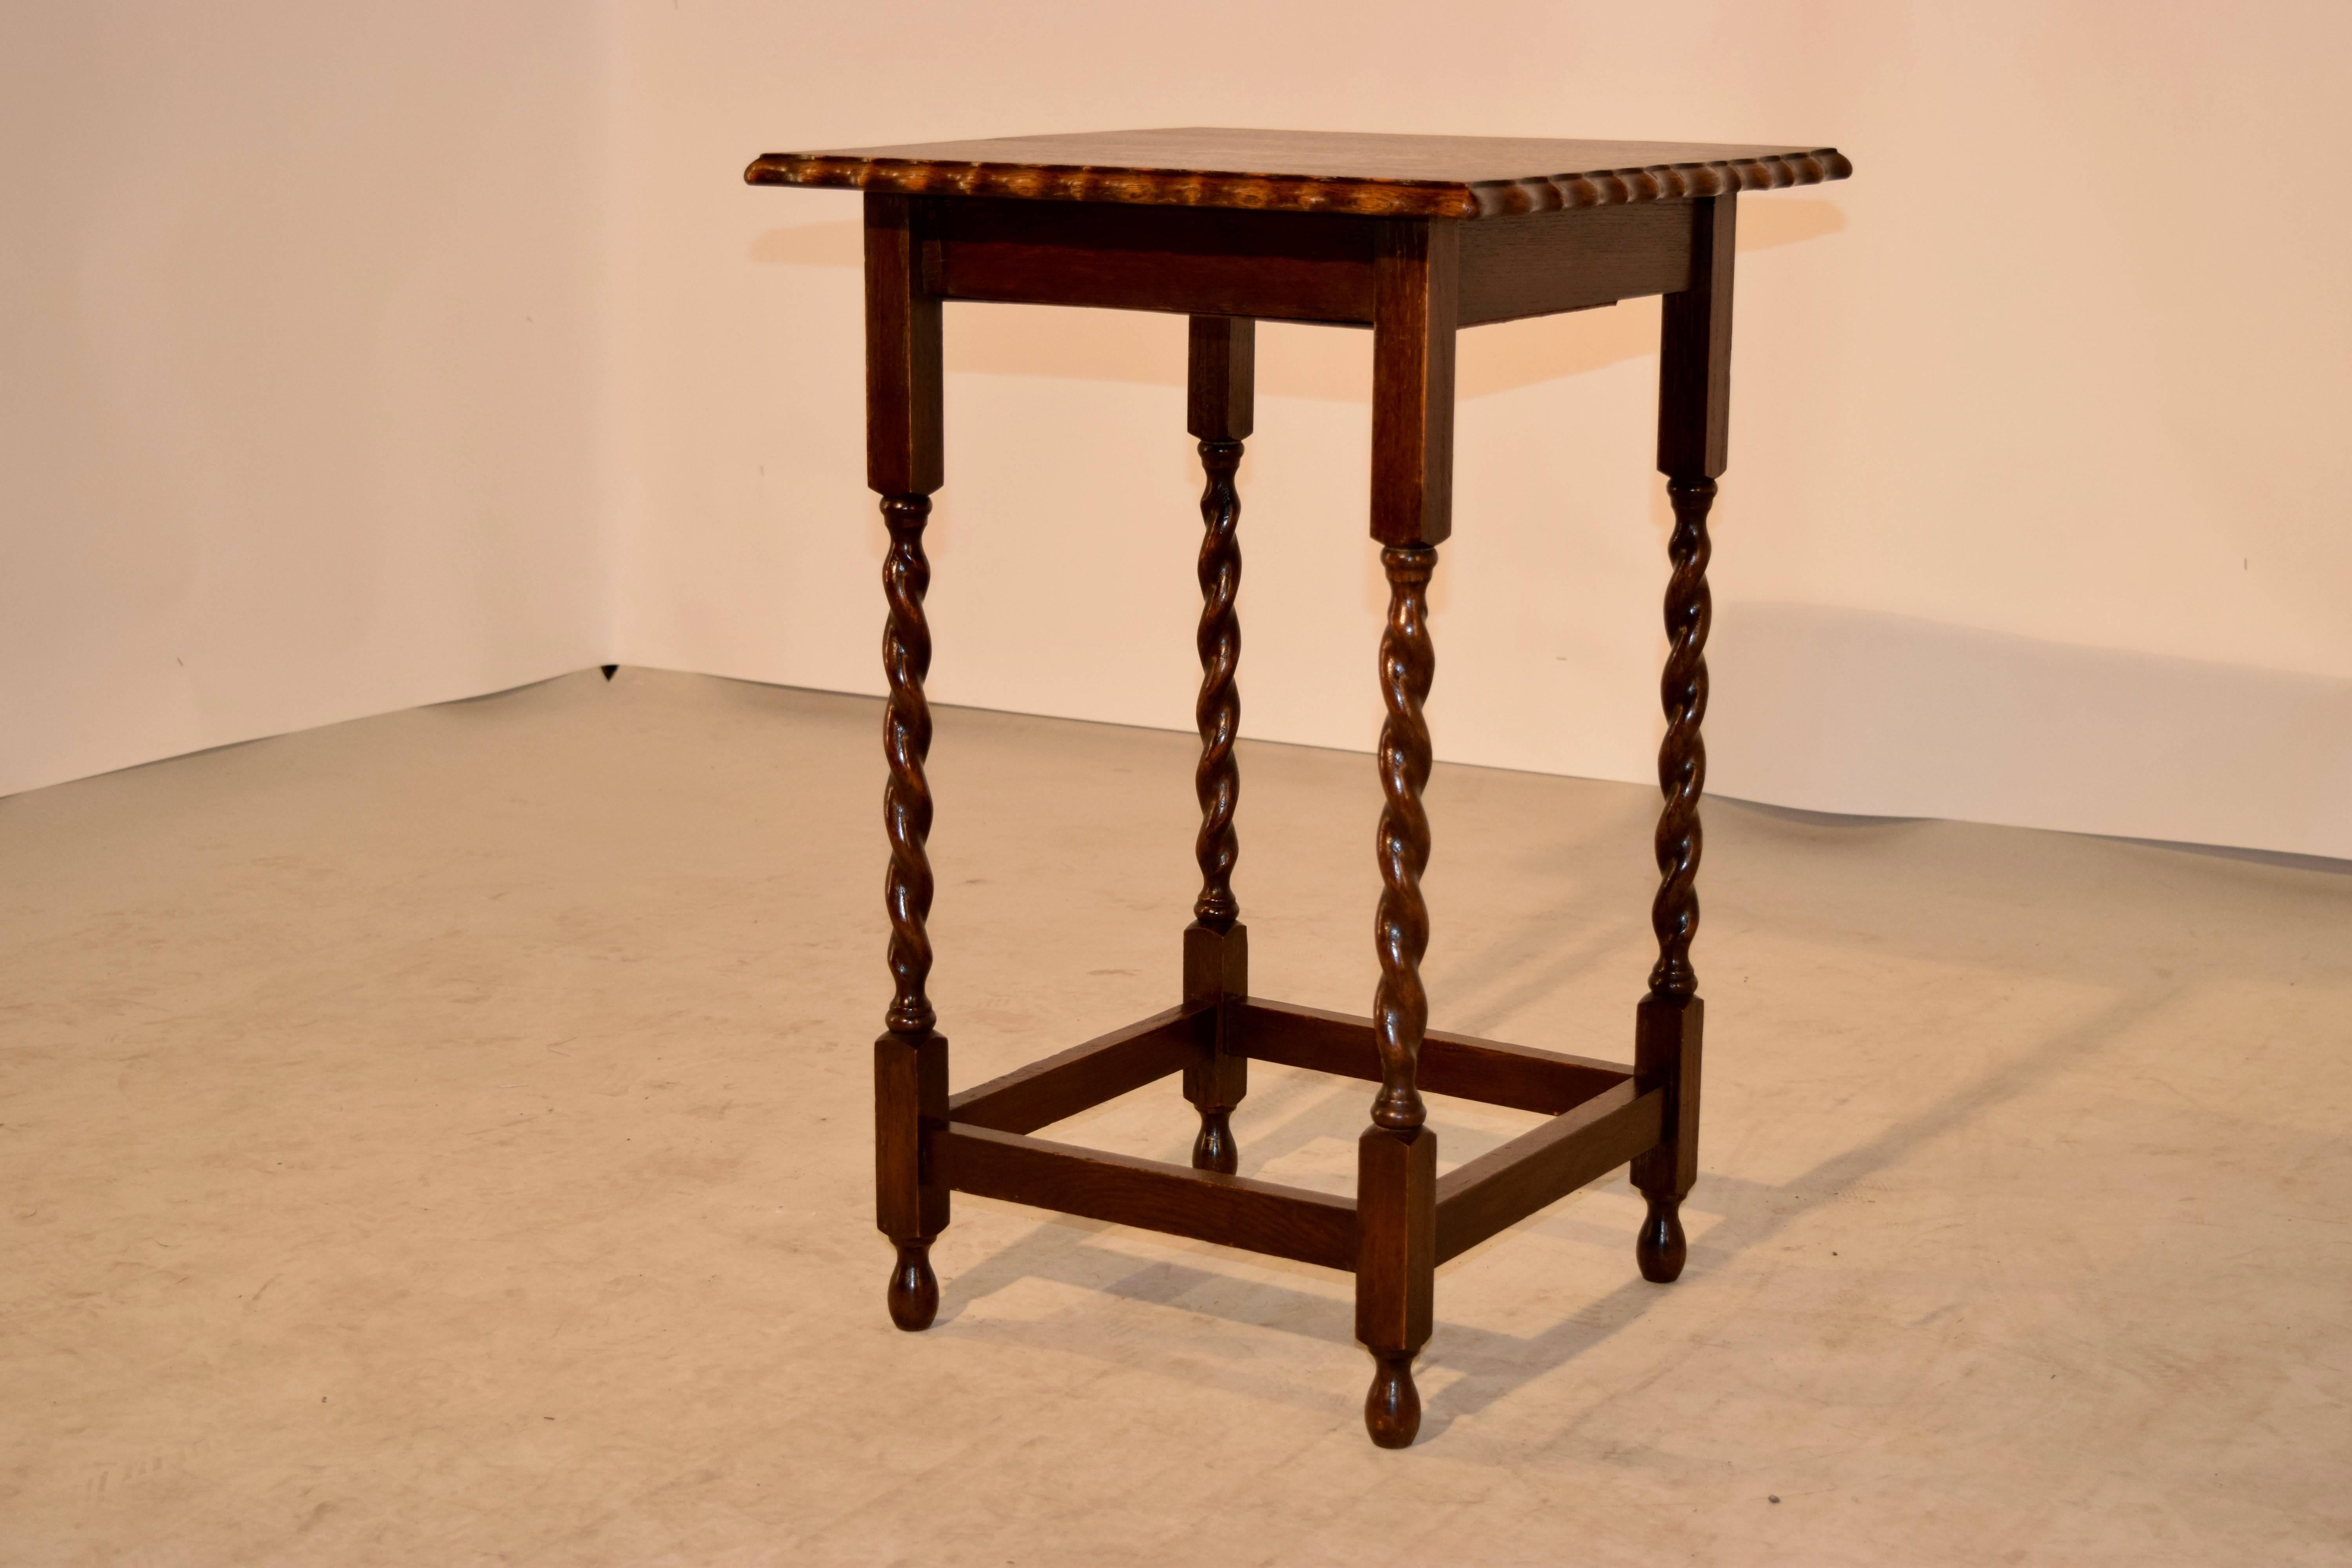 English side table with a square top, which has a scalloped and beveled edge following down to a simple apron and hand-turned barley twist legs, joined by stretchers and raised on turned feet.